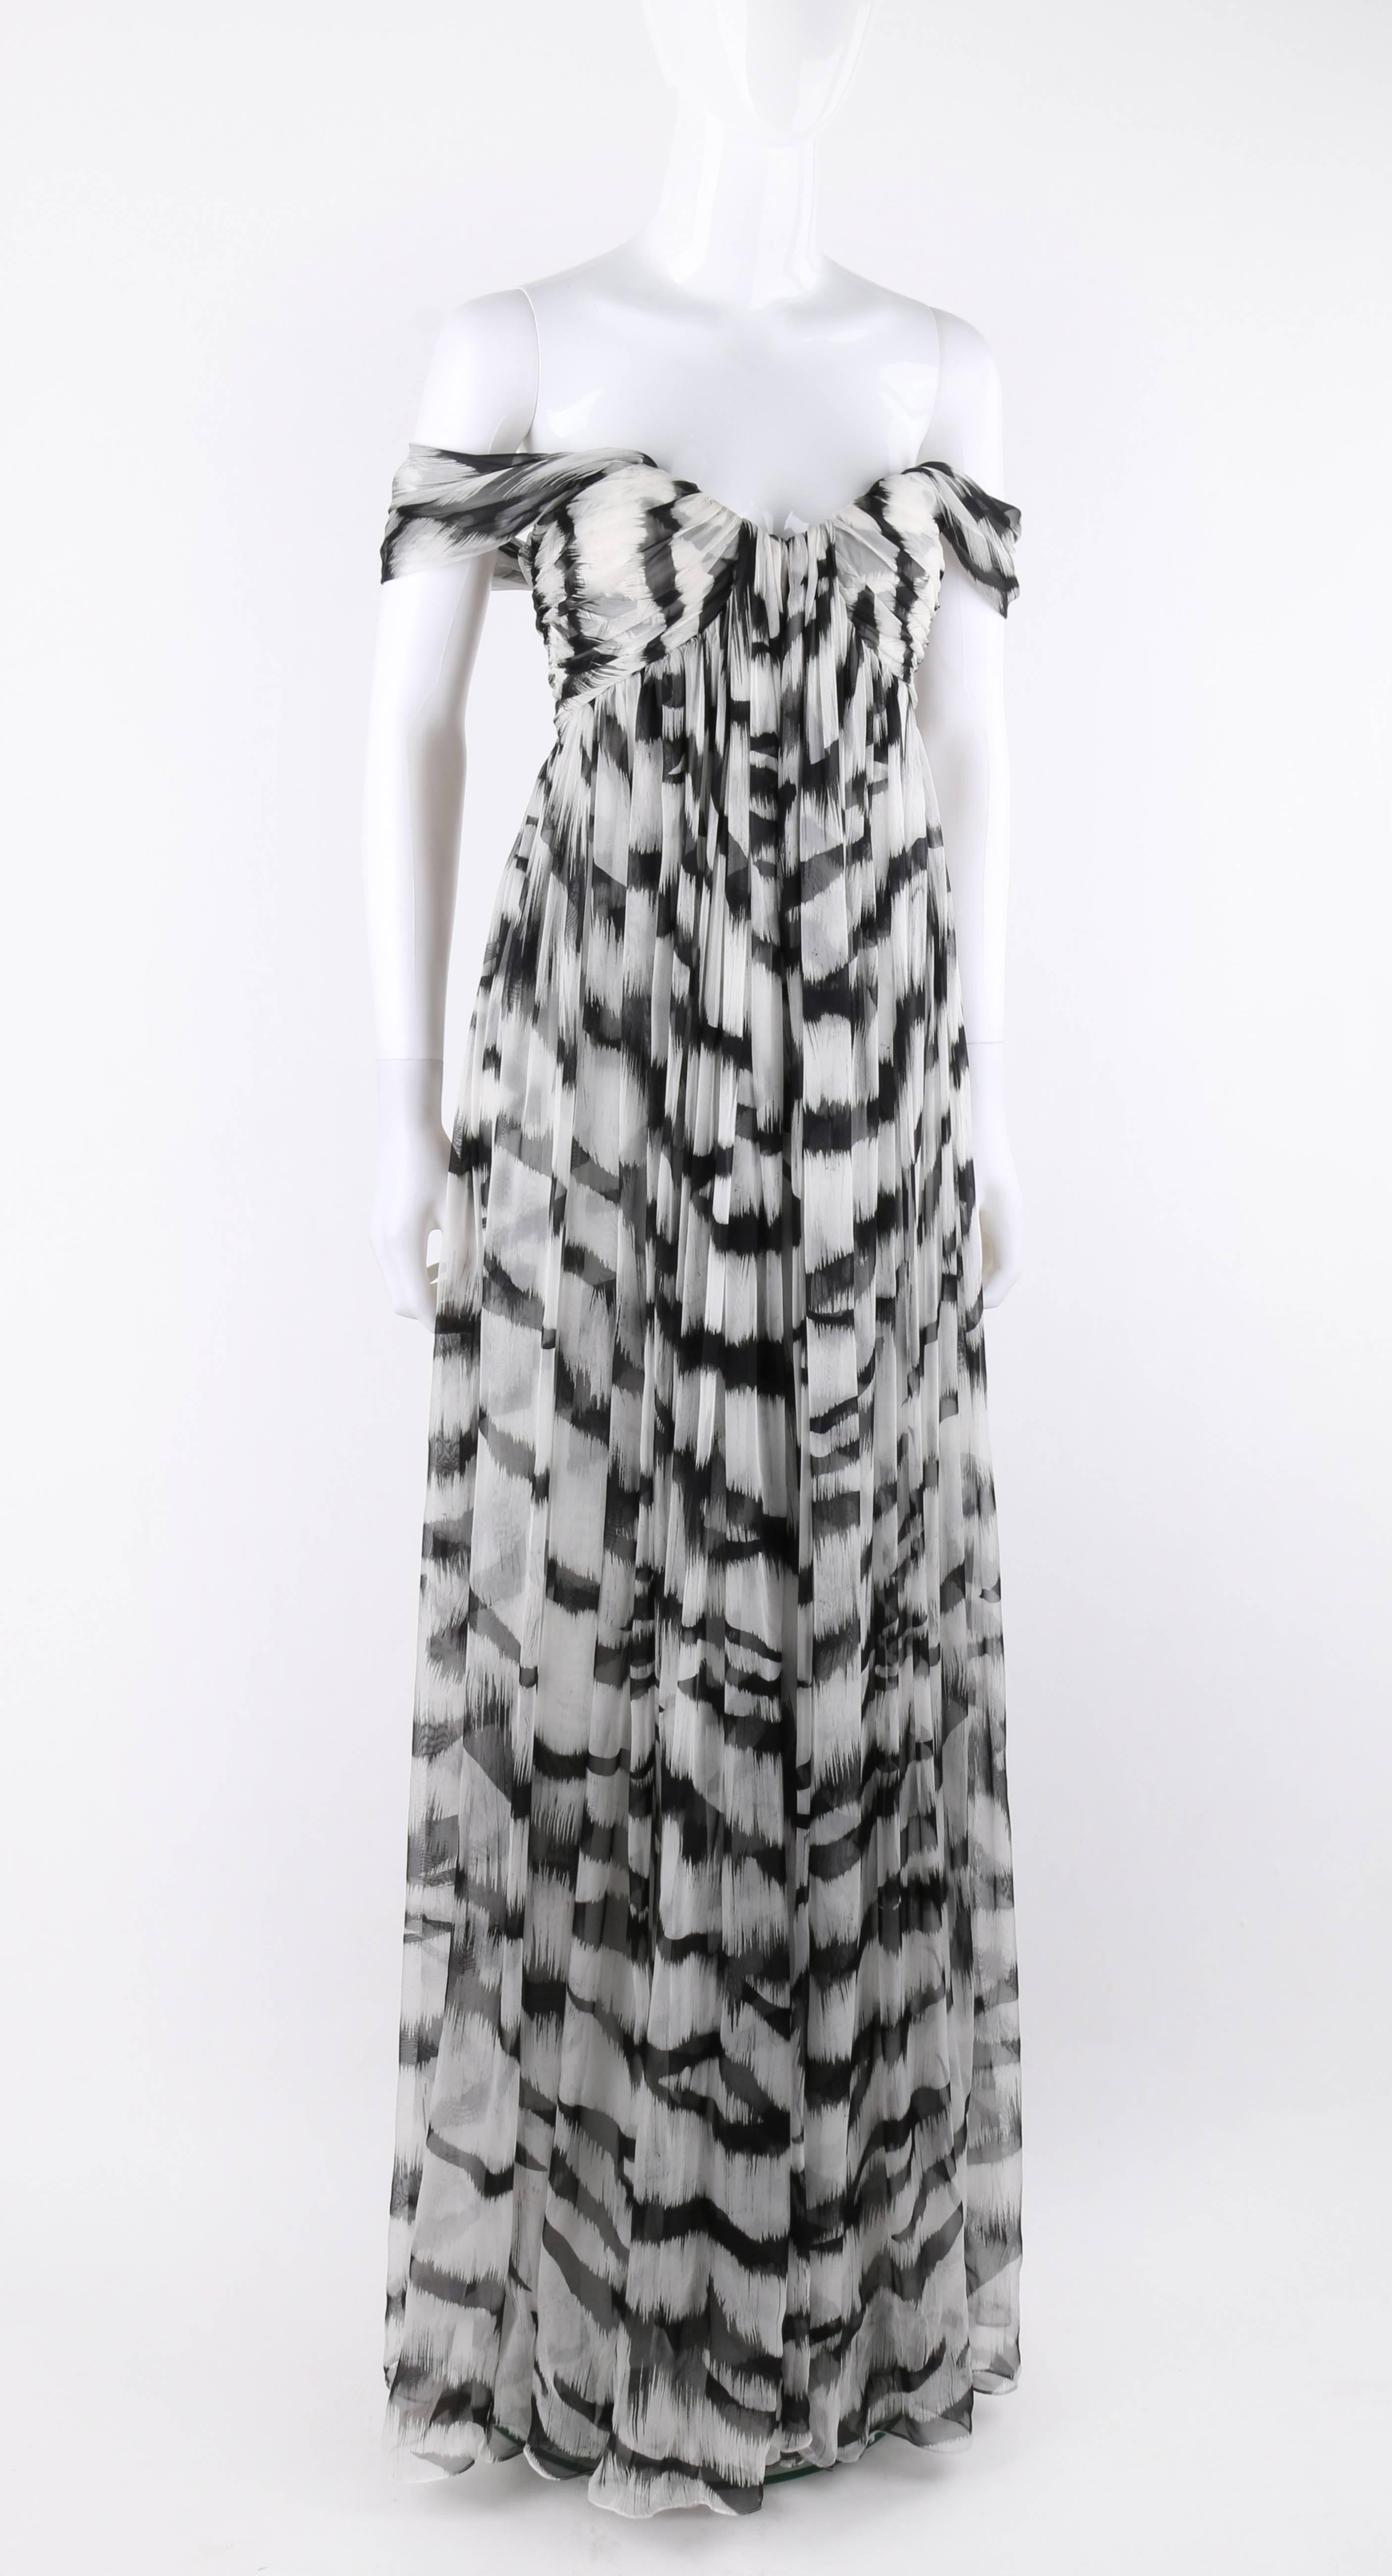 Alexander McQueen Spring/Summer 2012 white tiger stripe silk chiffon evening gown; New with tags. Designed by Sarah Burton. Black and white painterly tiger stripe printed silk chiffon. Off-the-shoulder straps. Sweet hear neckline. Pleated detail at